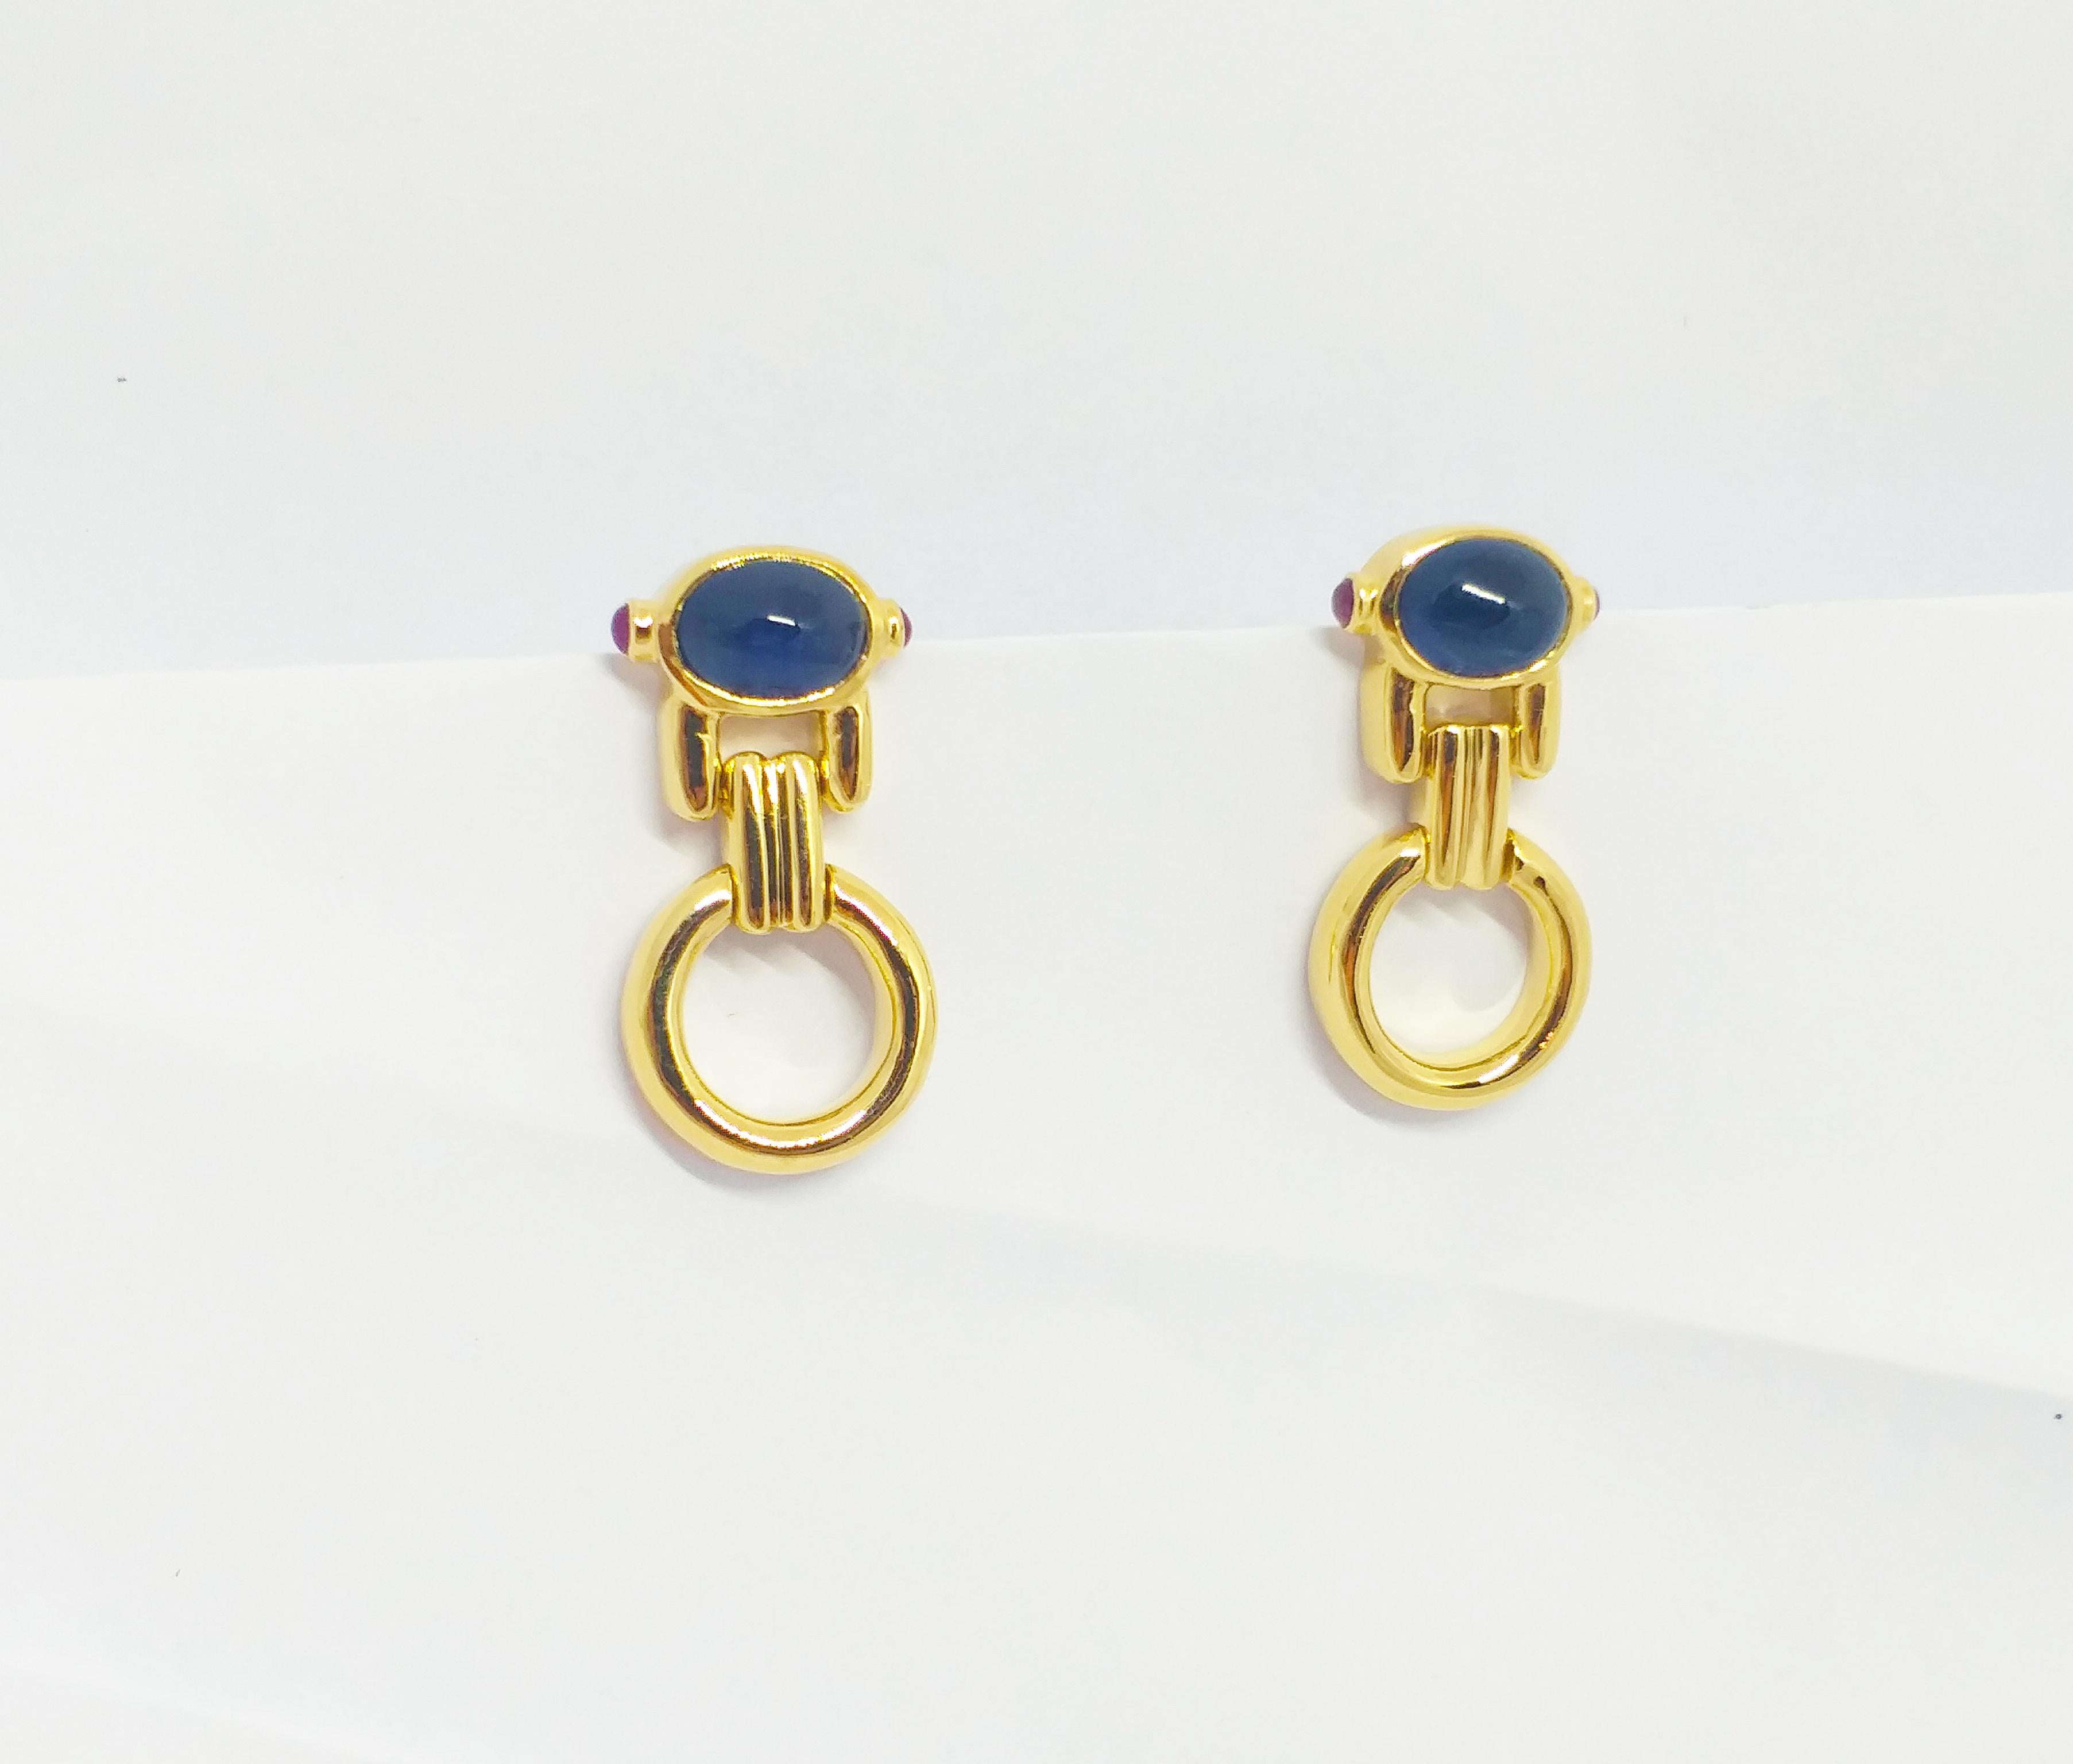 Cabochon Blue Sapphire with Cabochon Ruby Earrings set in 18K Gold Settings For Sale 9